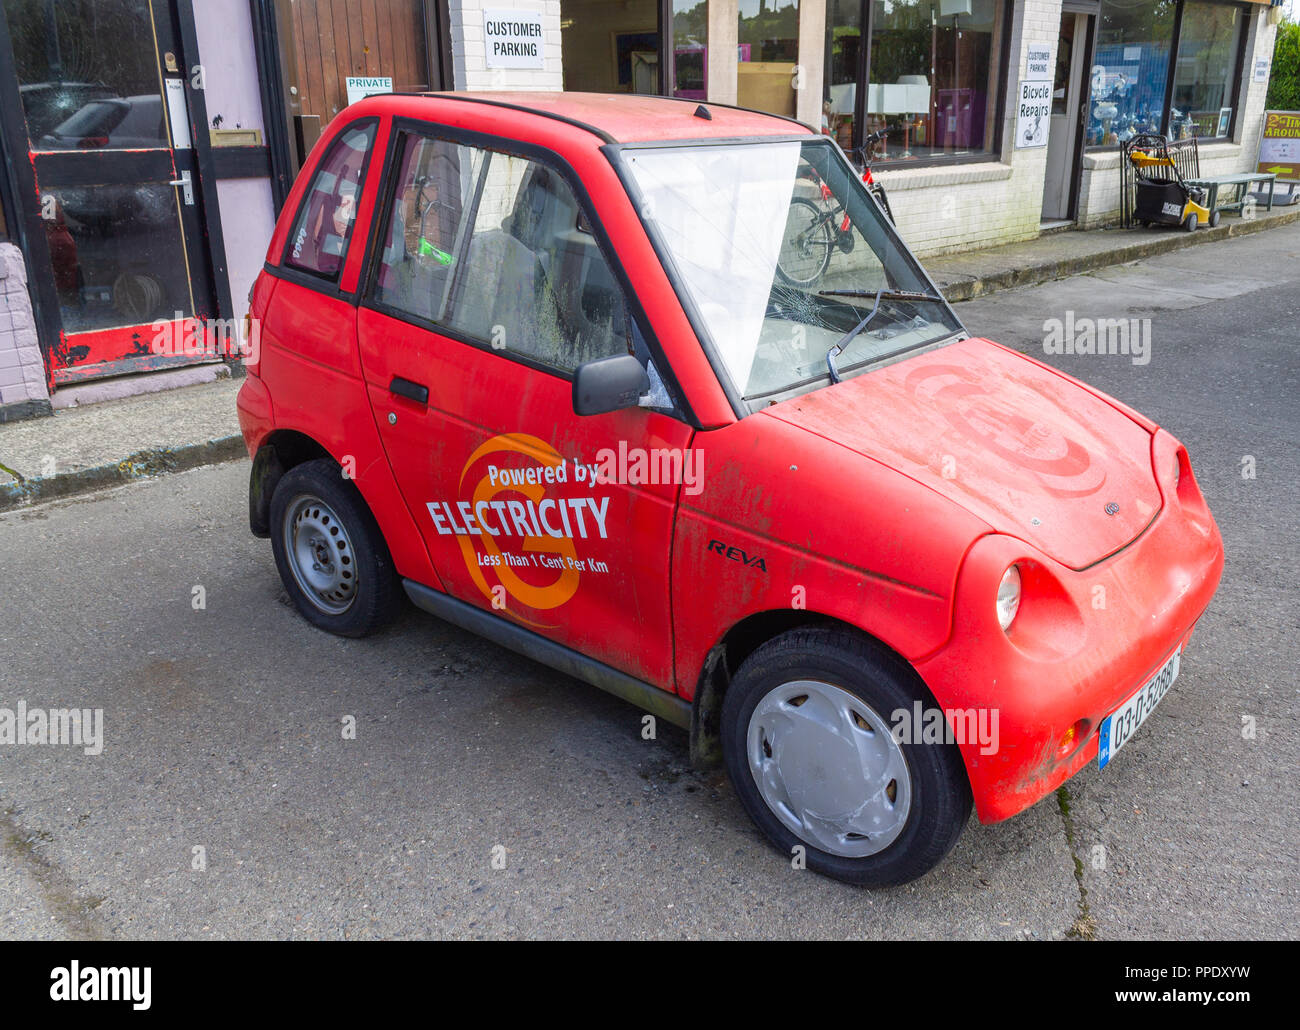 reva electric car painted red powered by electricity Stock Photo